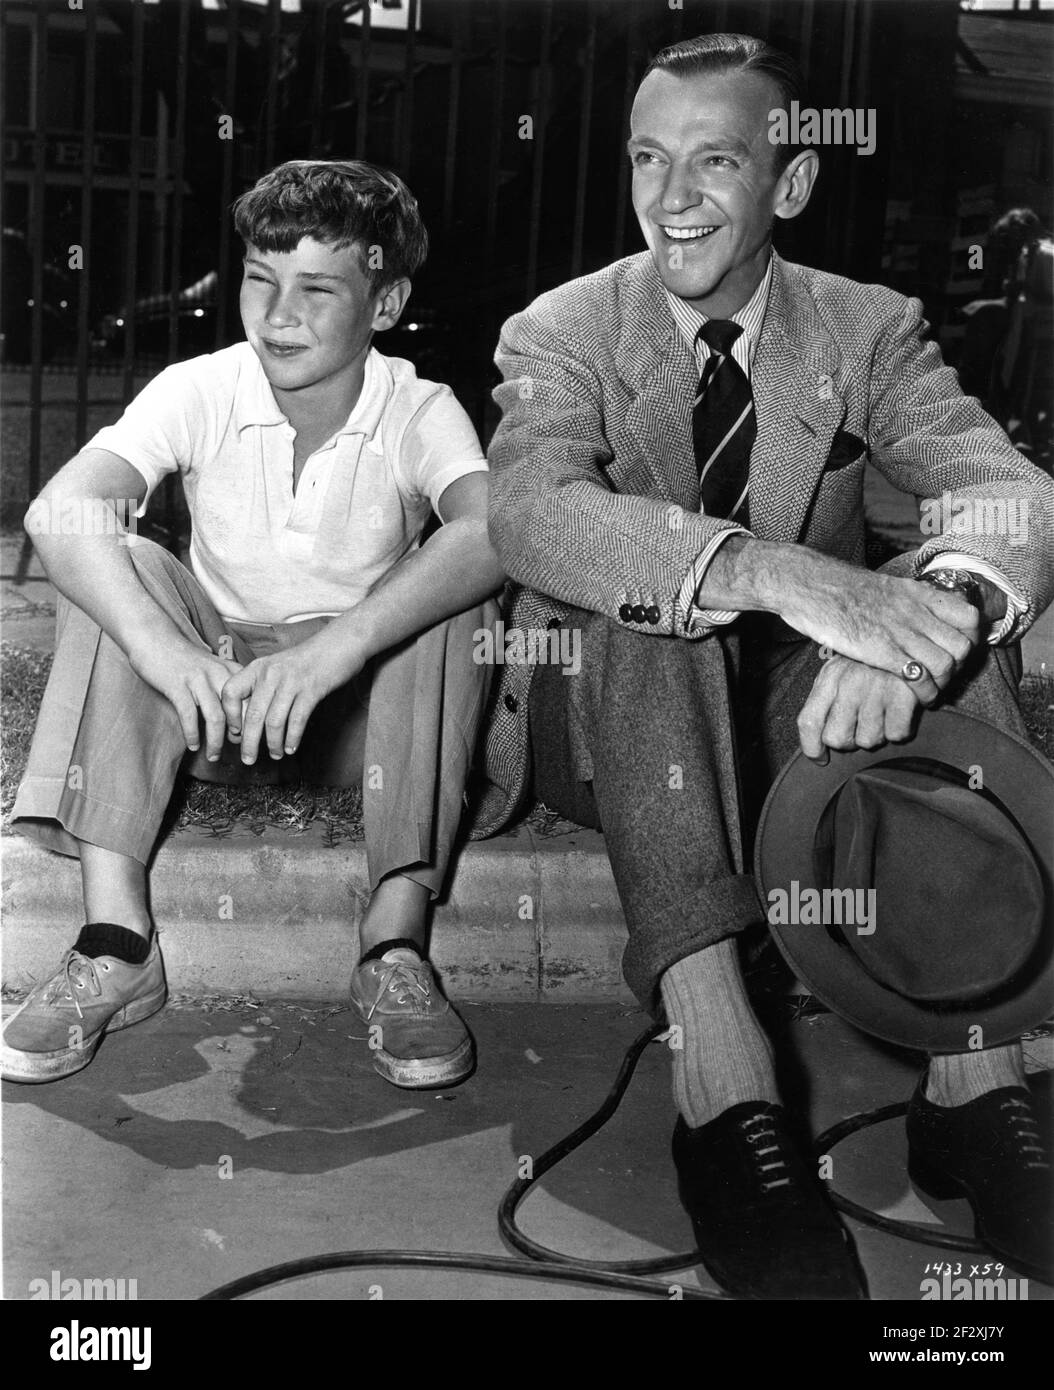 FRED ASTAIRE with his son FRED ASTAIRE JR on set candid watching Ginger Rogers perform a scene during filming of THE BARKELEYS OF BROADWAY 1949 director CHARLES WALTERS original screenplay Betty Comden and Adolph Green producer Arthur Freed Metro Goldwyn Mayer Stock Photo